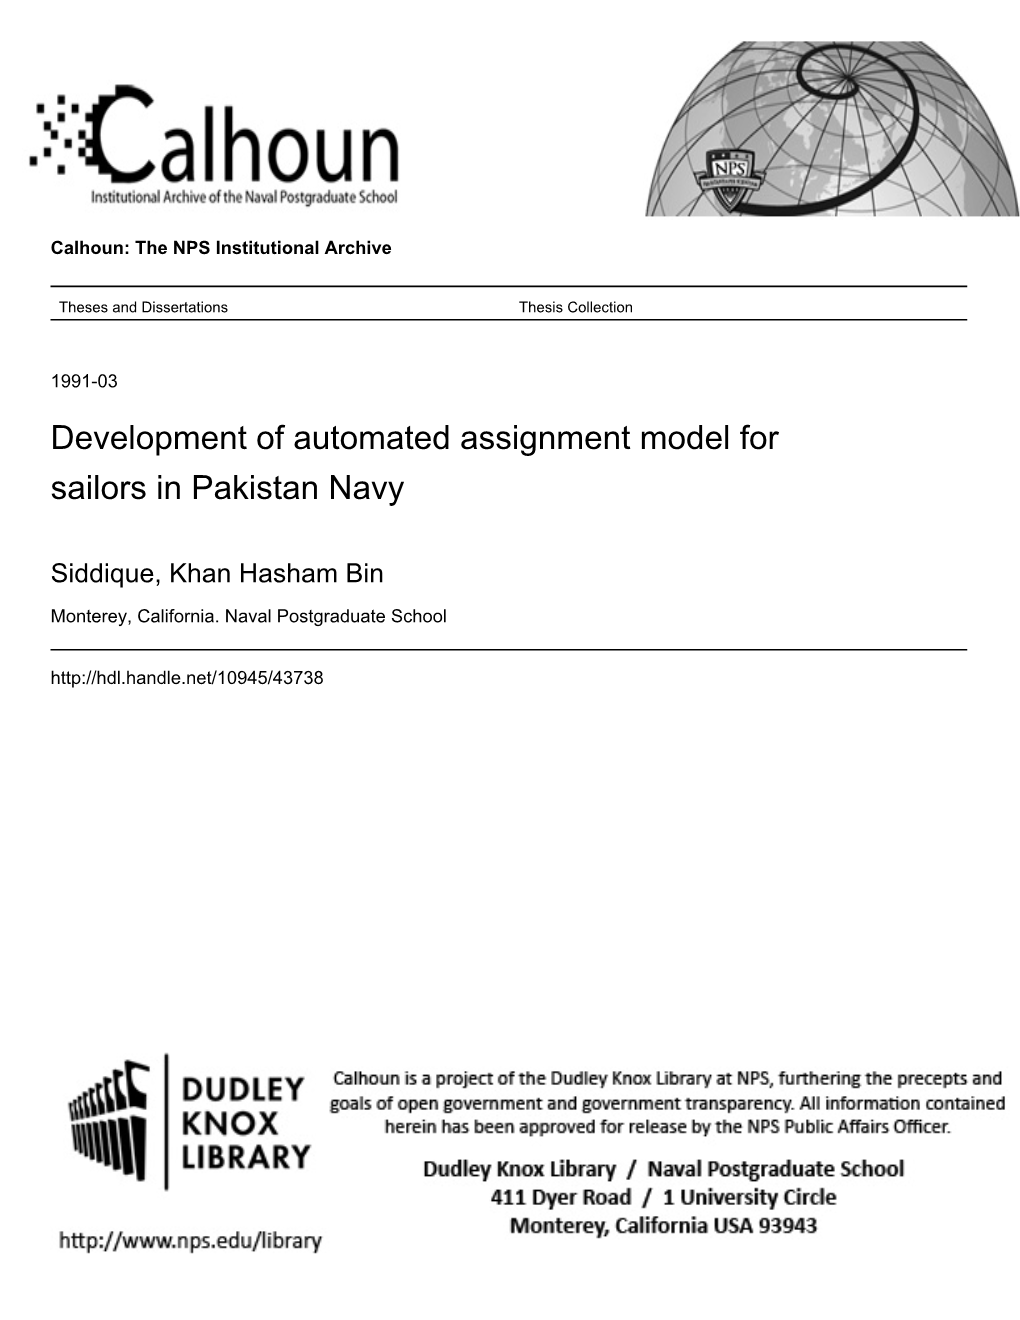 Development of Automated Assignment Model for Sailors in Pakistan Navy